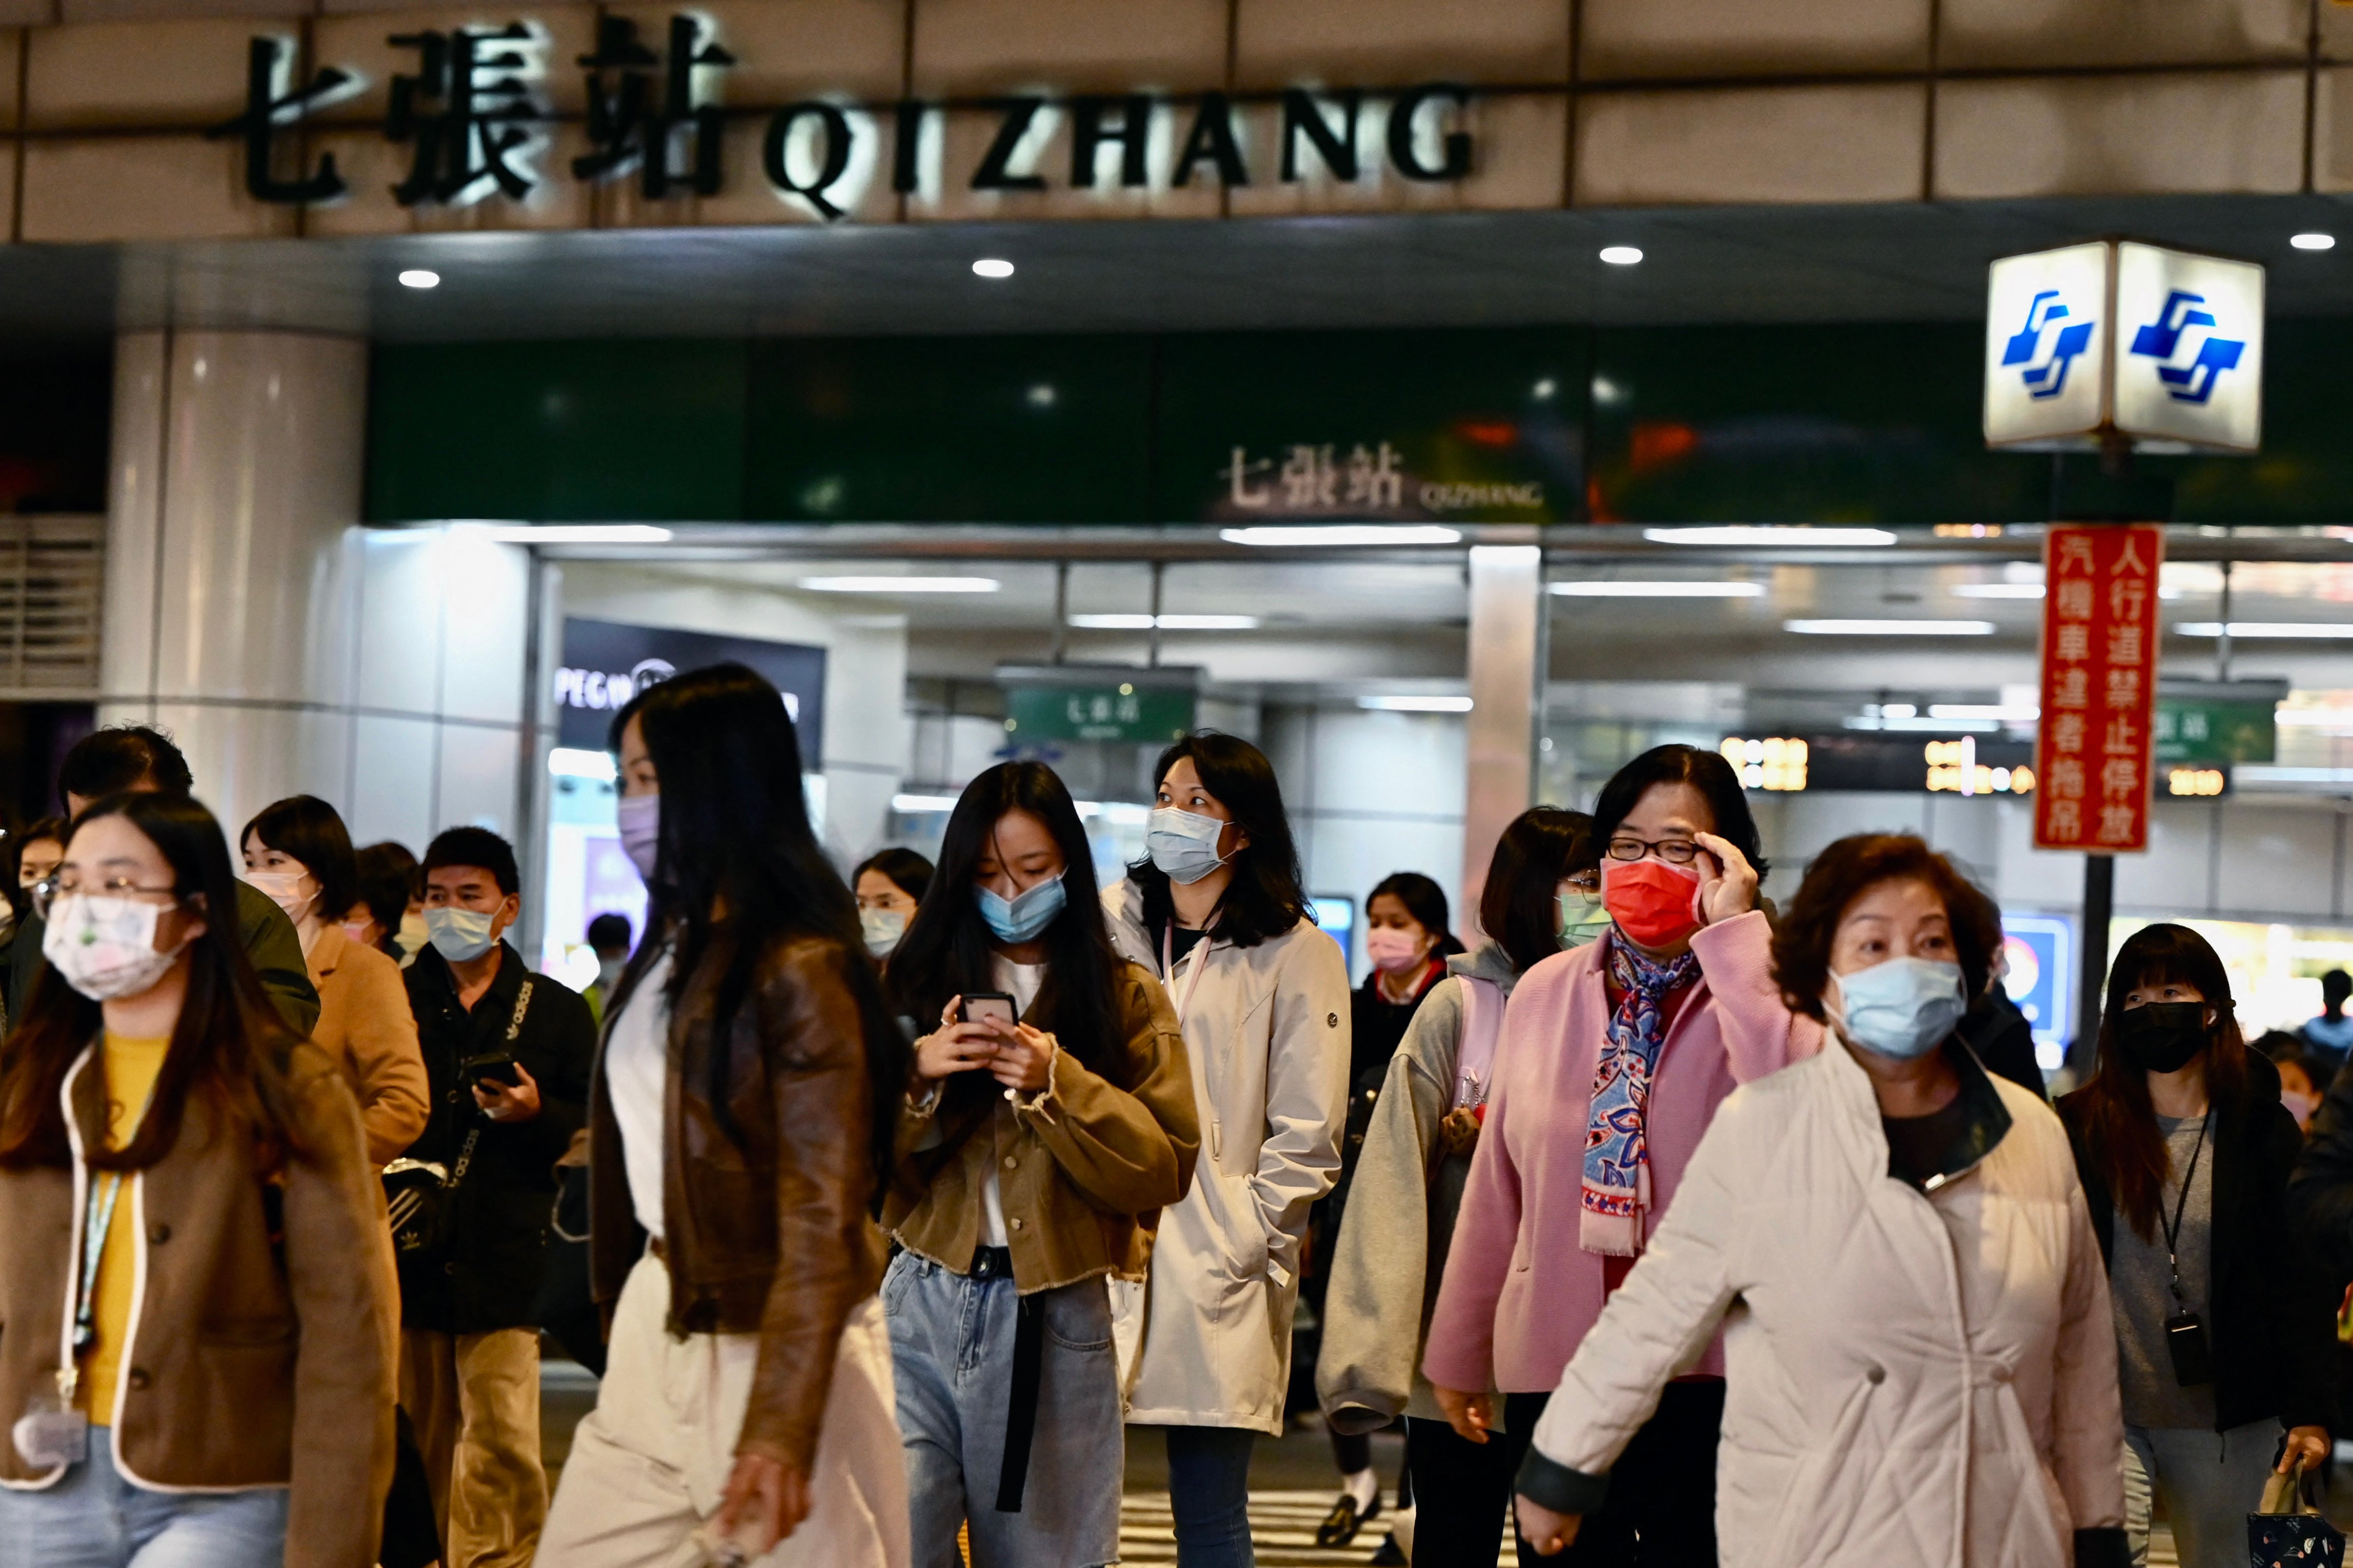 File: Commuters exit a Mass Rapid Transport (MRT) station in Xindian in New Taipei City on 3 January 2022, after a strong earthquake struck off the coast of eastern Taiwan with shaking felt in the capital Taipei